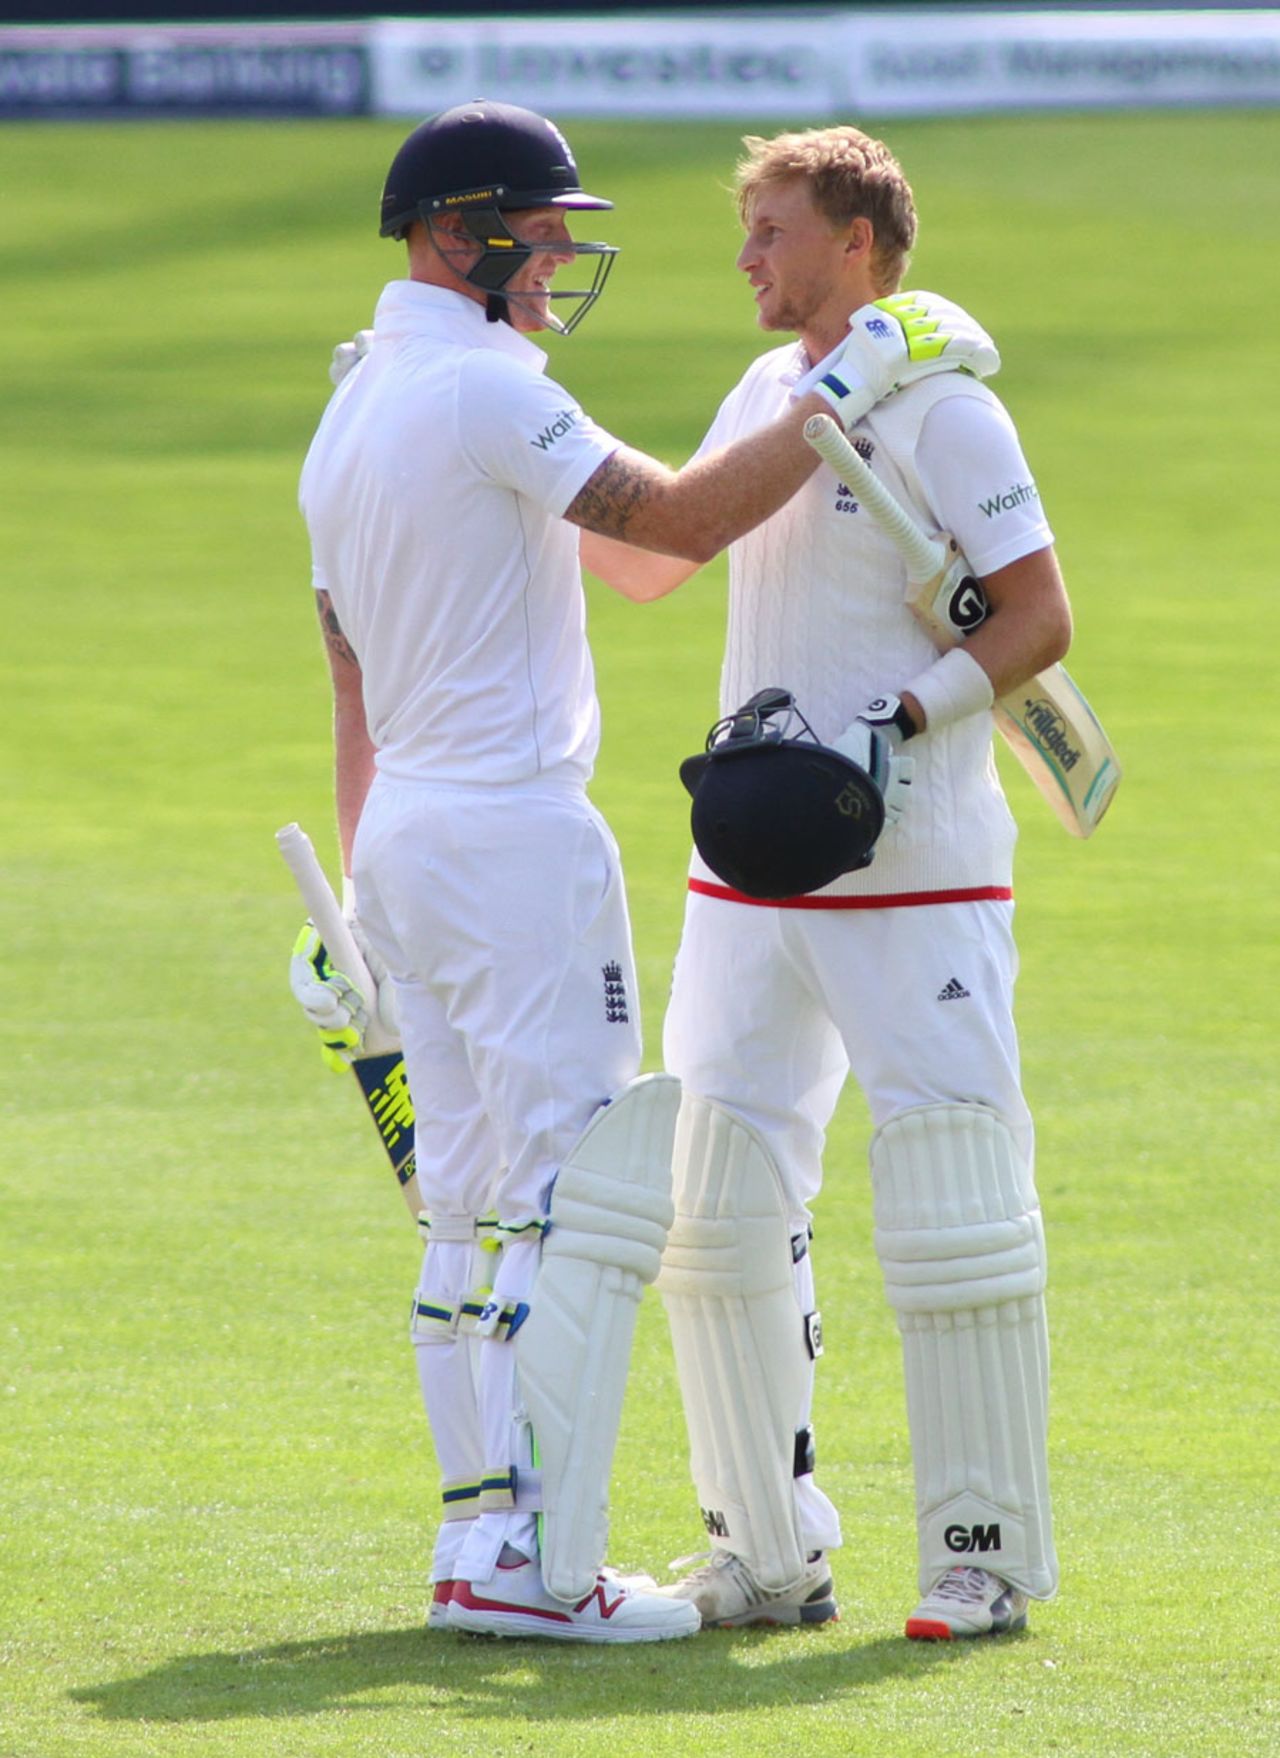 Ben Stokes congratulates Joe Root on reaching his century, England v Australia, 1st Investec Ashes Test, Cardiff, 1st day, July 8, 2015